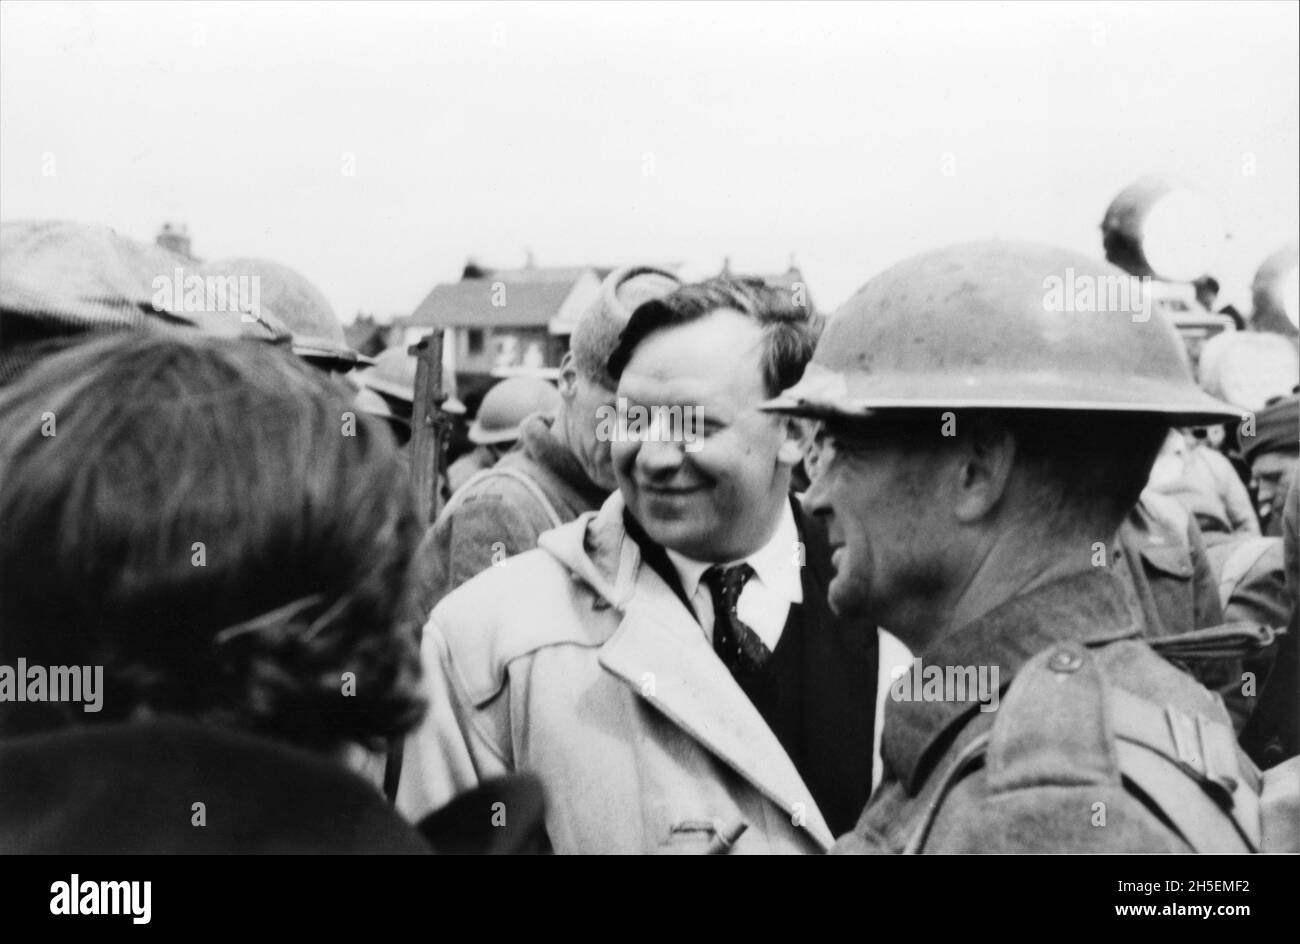 Director LESLIE NORMAN and JOHN MILLS on set location candid in Rye, East Sussex England during filming of DUNKIRK 1958 director LESLIE NORMAN music Malcolm Arnold producer Michael Balcon Ealing Studios / Metro Goldwyn Mayer Stock Photo